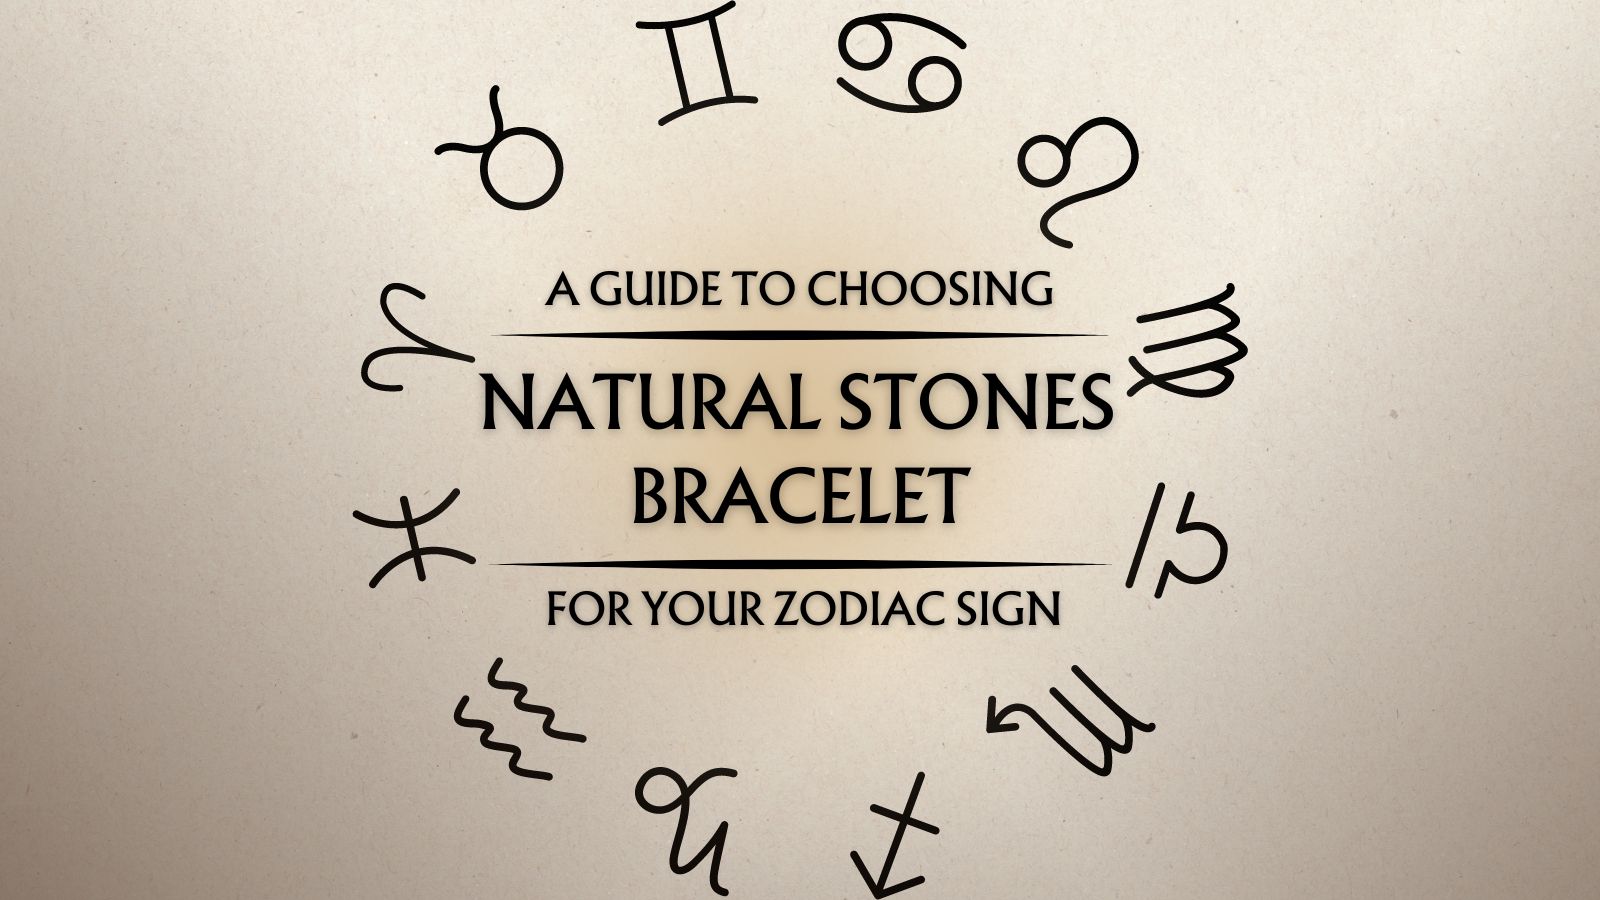 A Guide to Choosing the Right Natural Stone Bracelet for Your Zodiac Sign